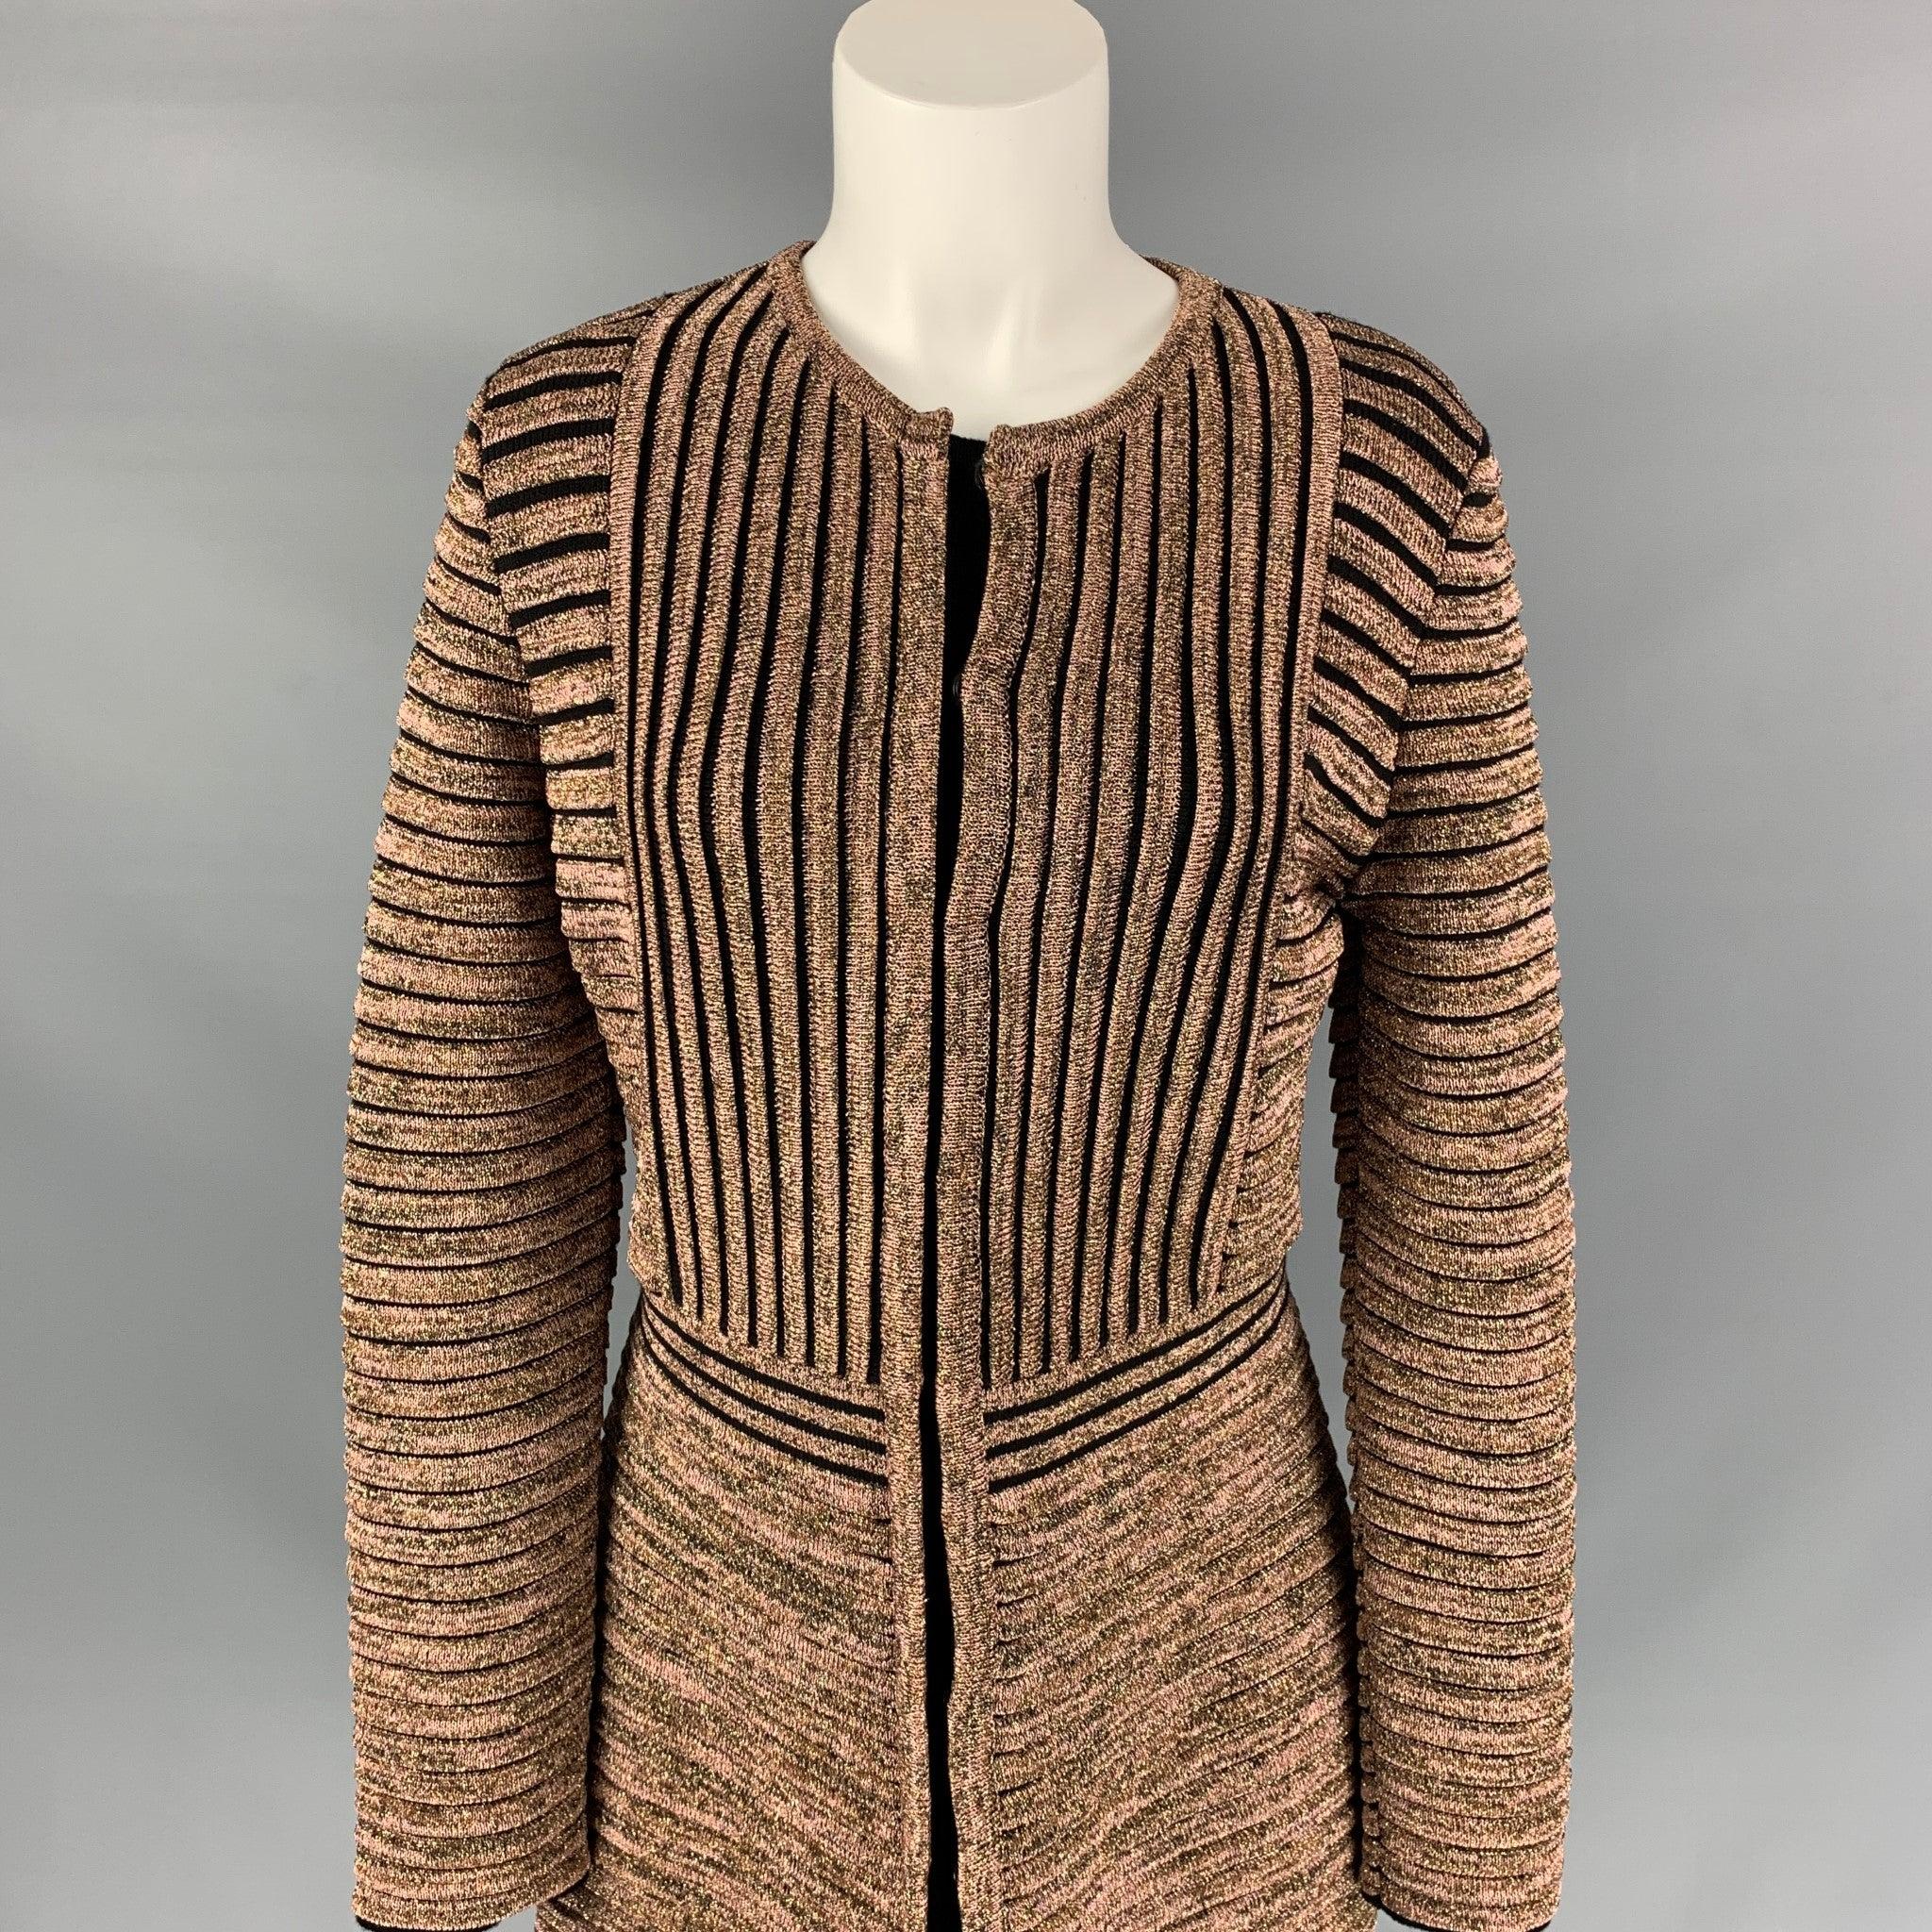 M MISSONI coat comes in a gold & black metallic wool / viscose featuring an a-line style, collarless, and a snap button closure. Made in Italy.
Very Good
Pre-Owned Condition. 

Marked:  I 44 / D 38 / A 38 / EFB 40 / GB 12 / US 8 

Measurements: 
